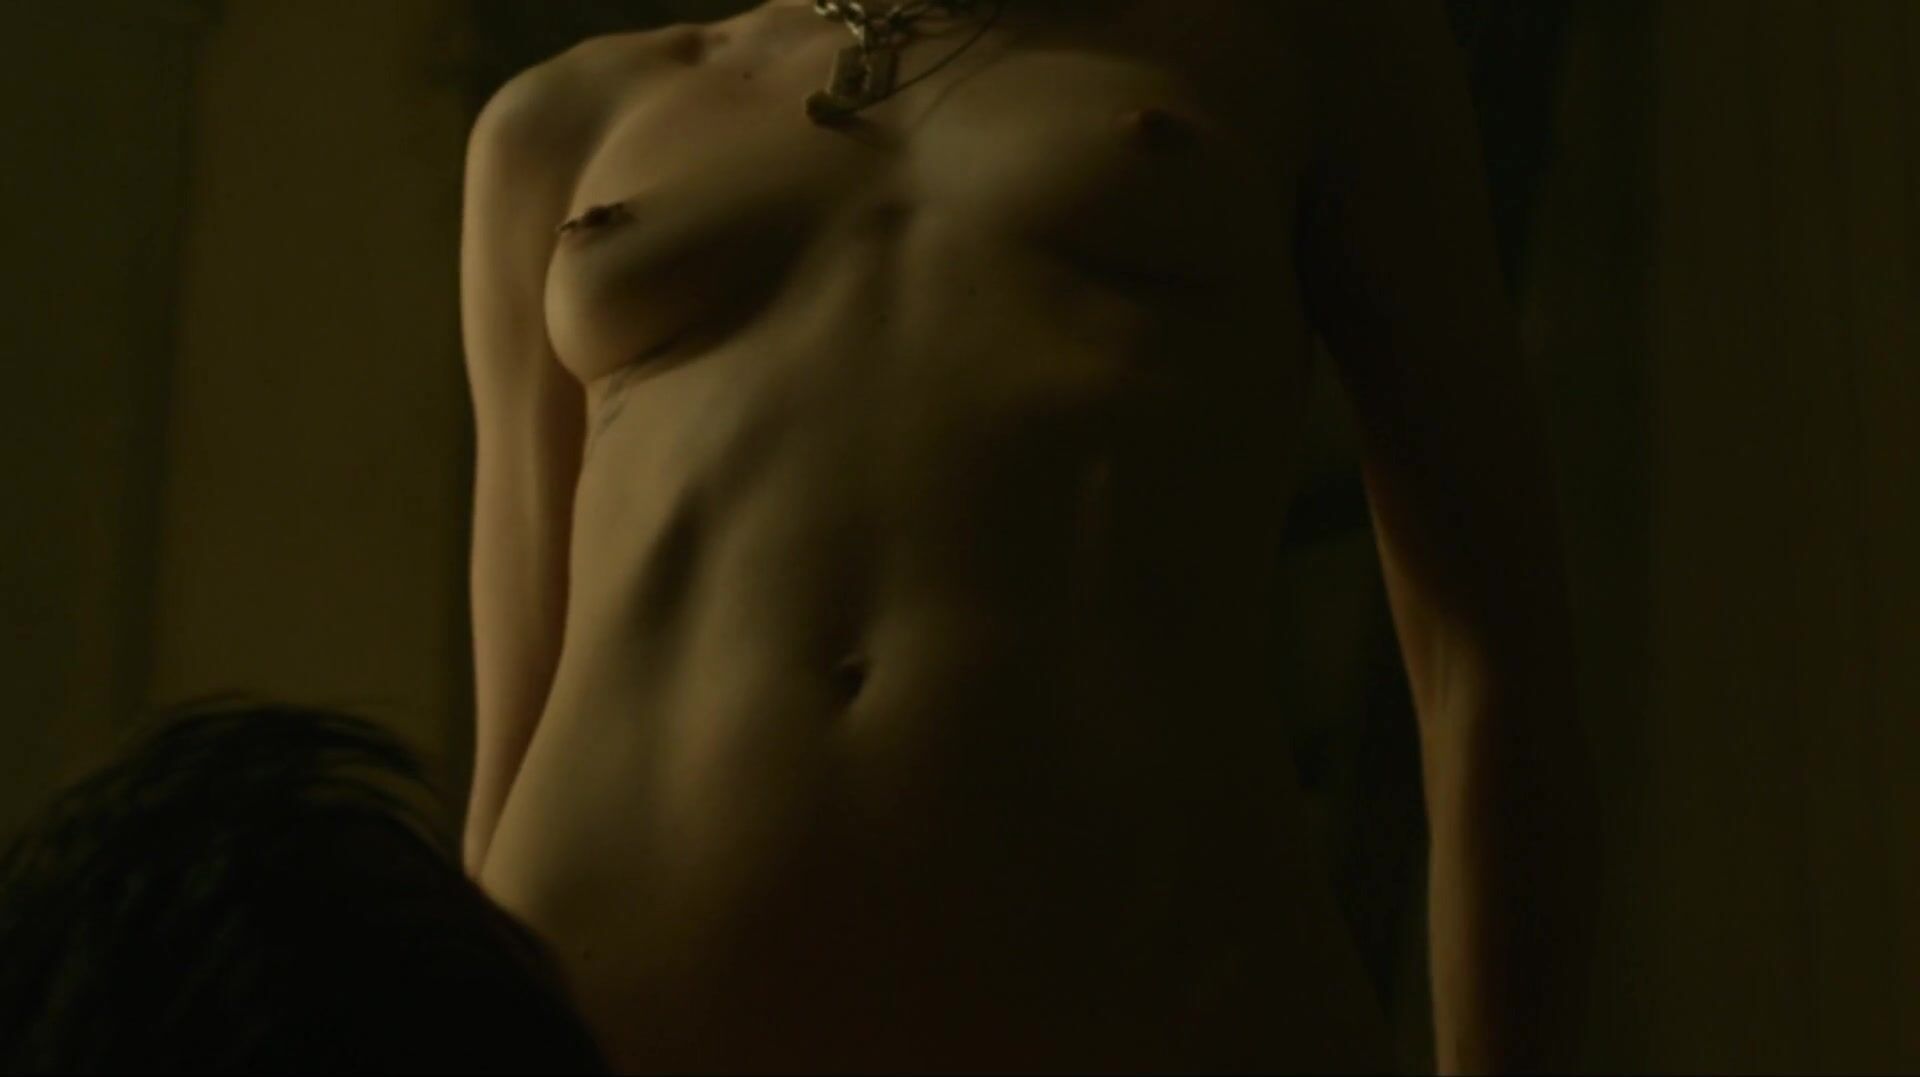 Cartoon Men hump Rooney Mara with her consent or without it in Girl With The Dragon Tattoo Desi - 2